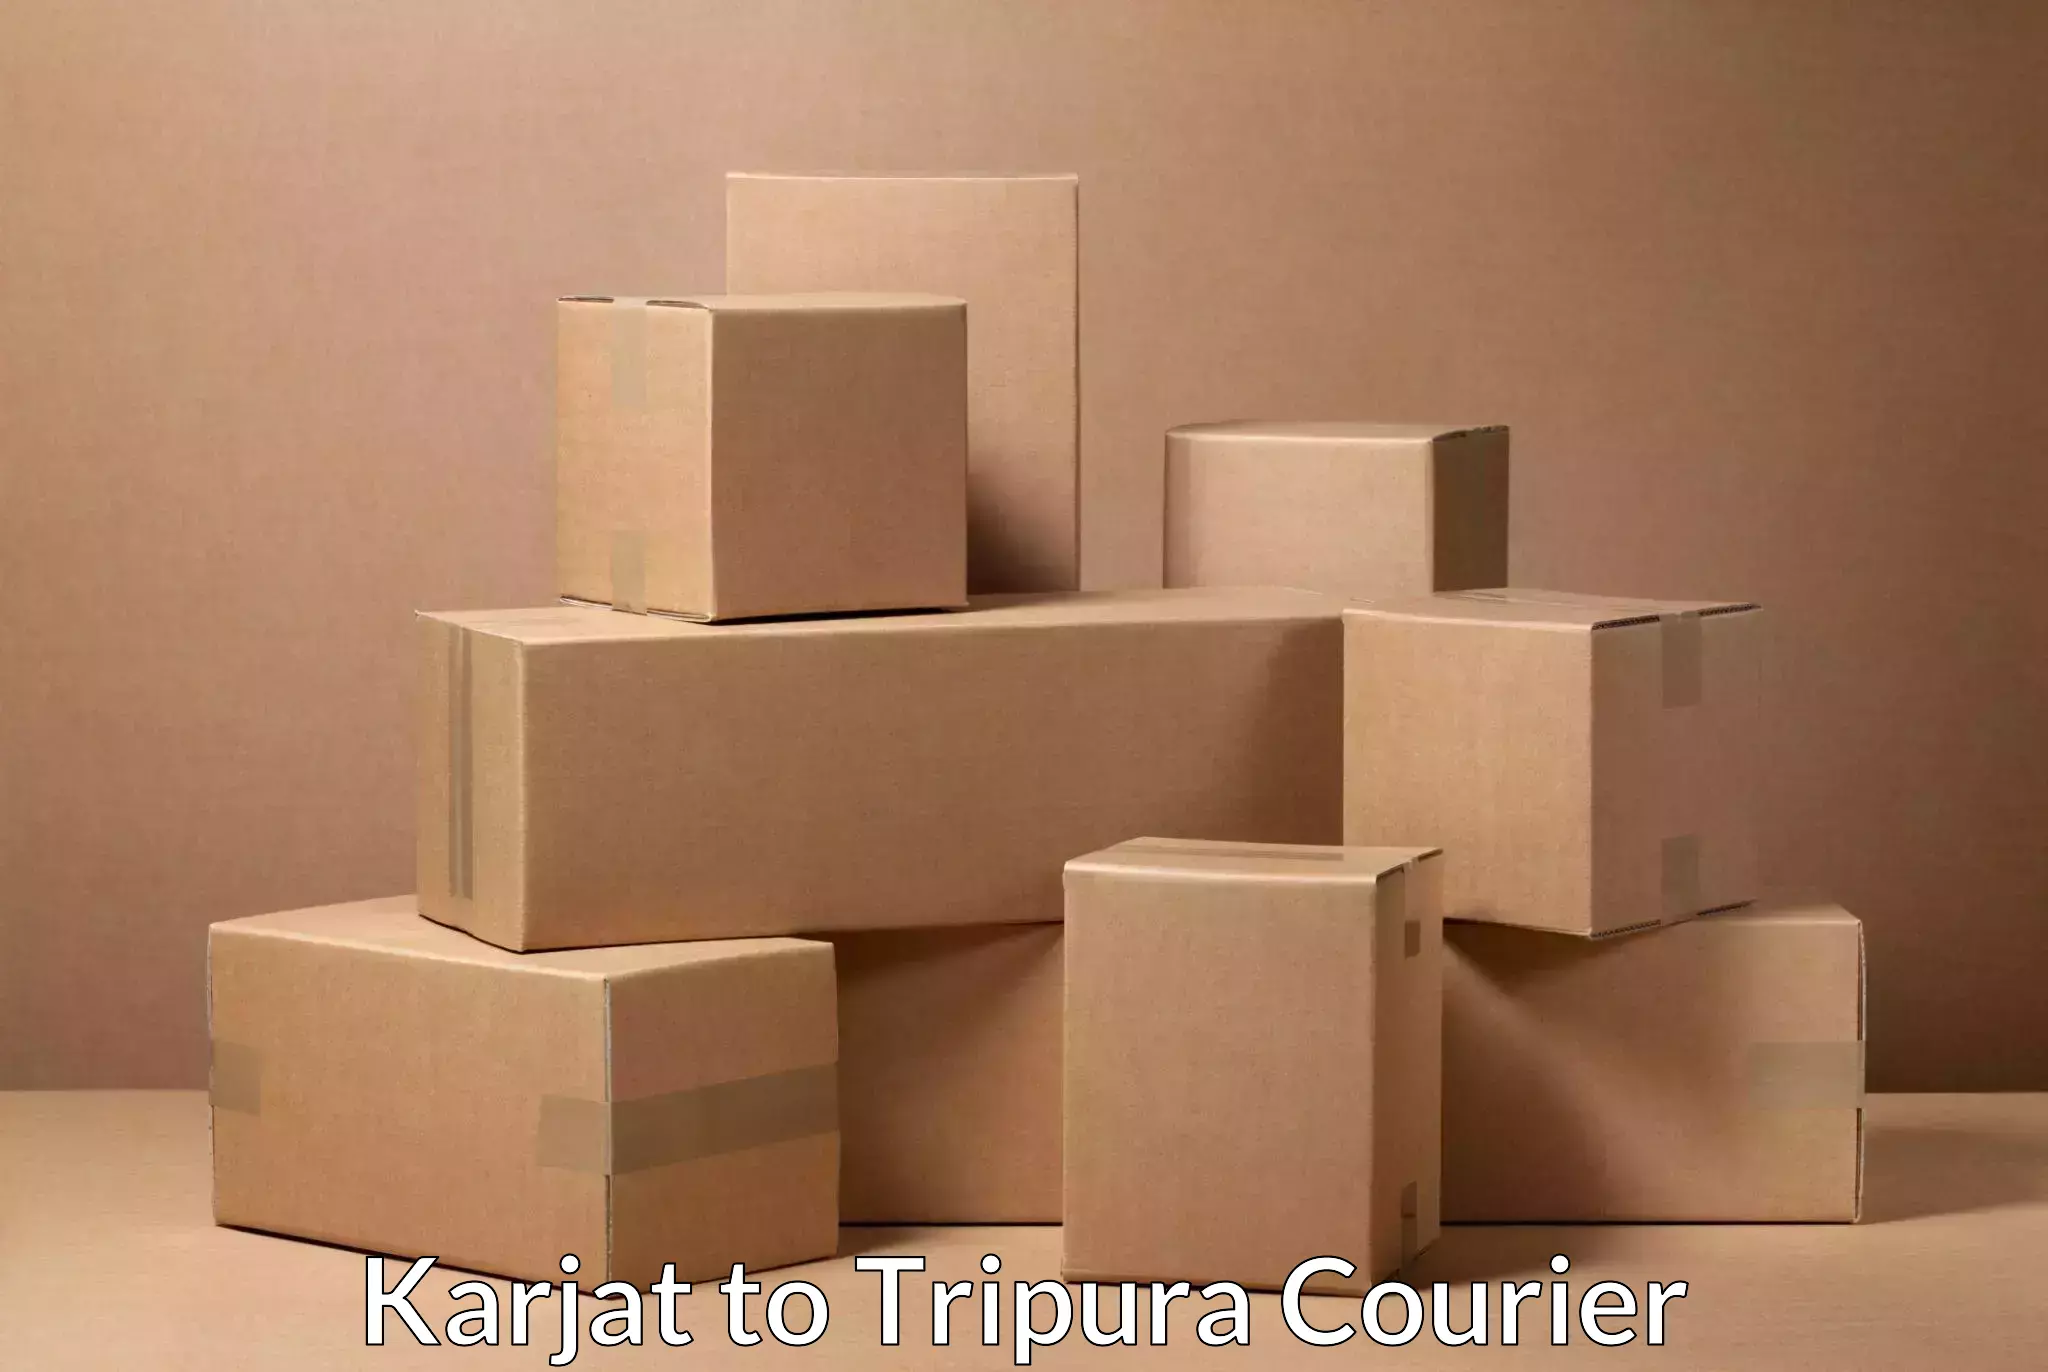 Easy access courier services Karjat to IIIT Agartala